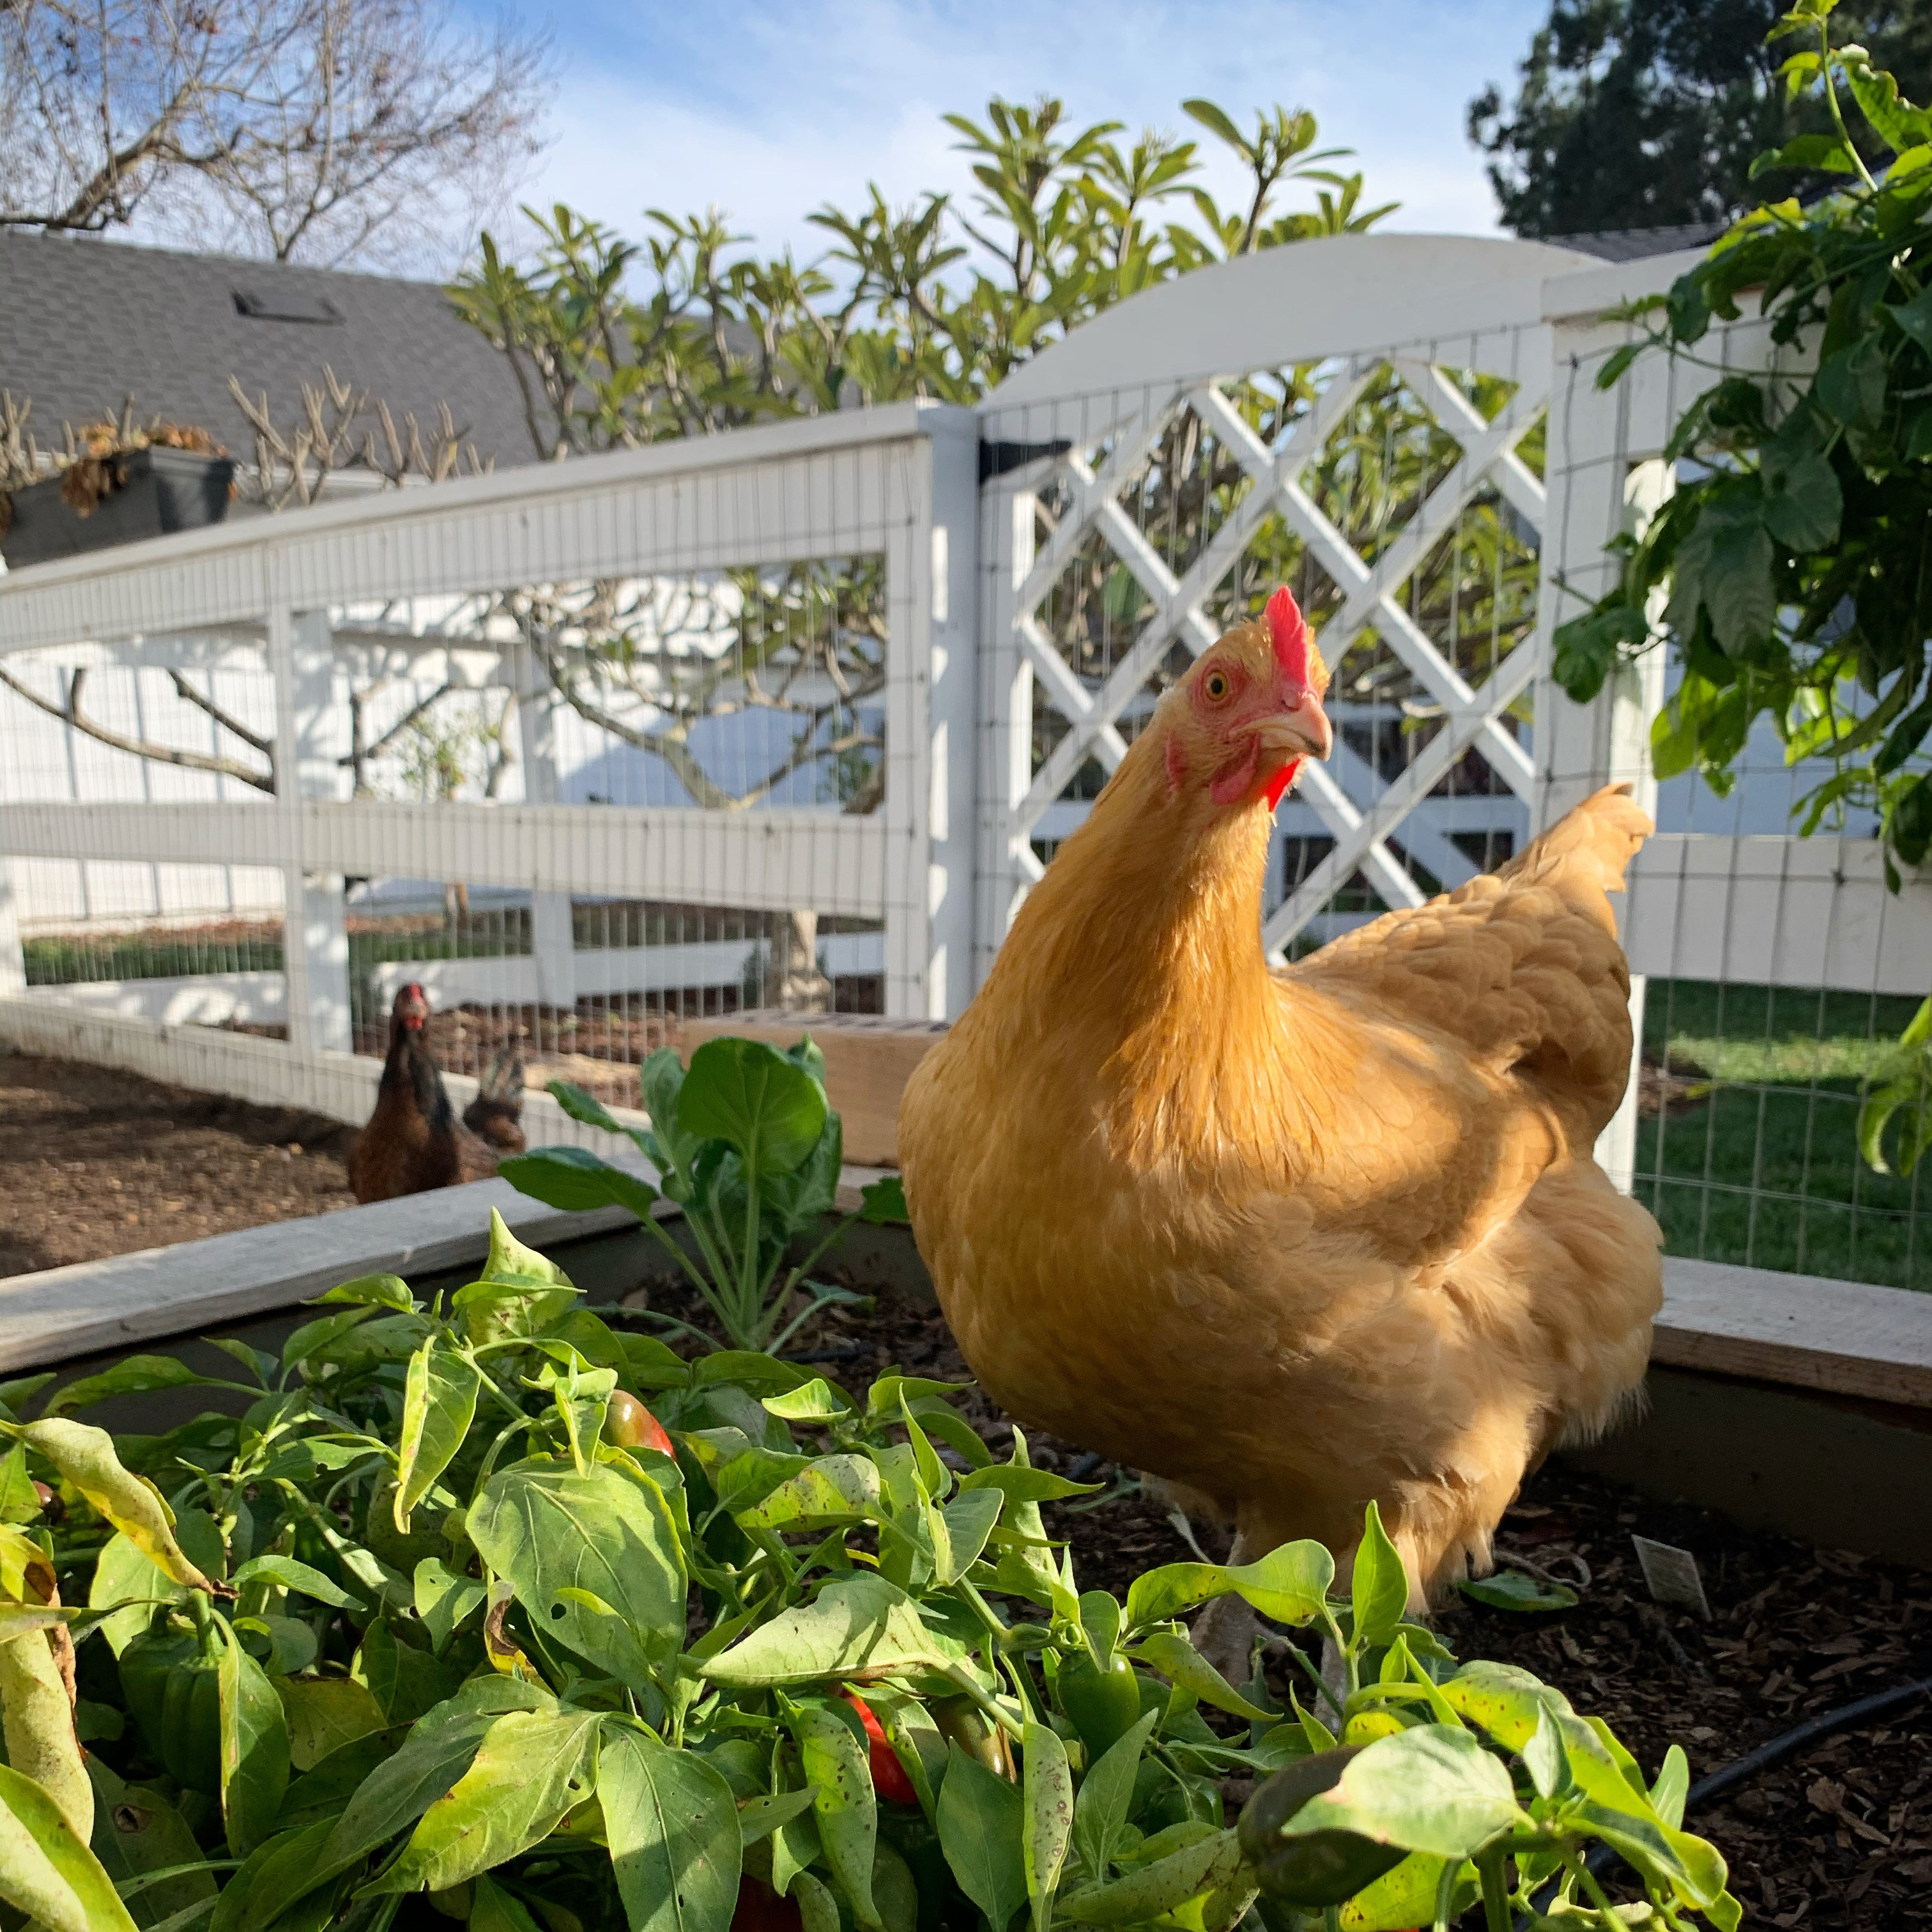 Our backyard is huge with raised garden beds, chickens and a very large trampoline!